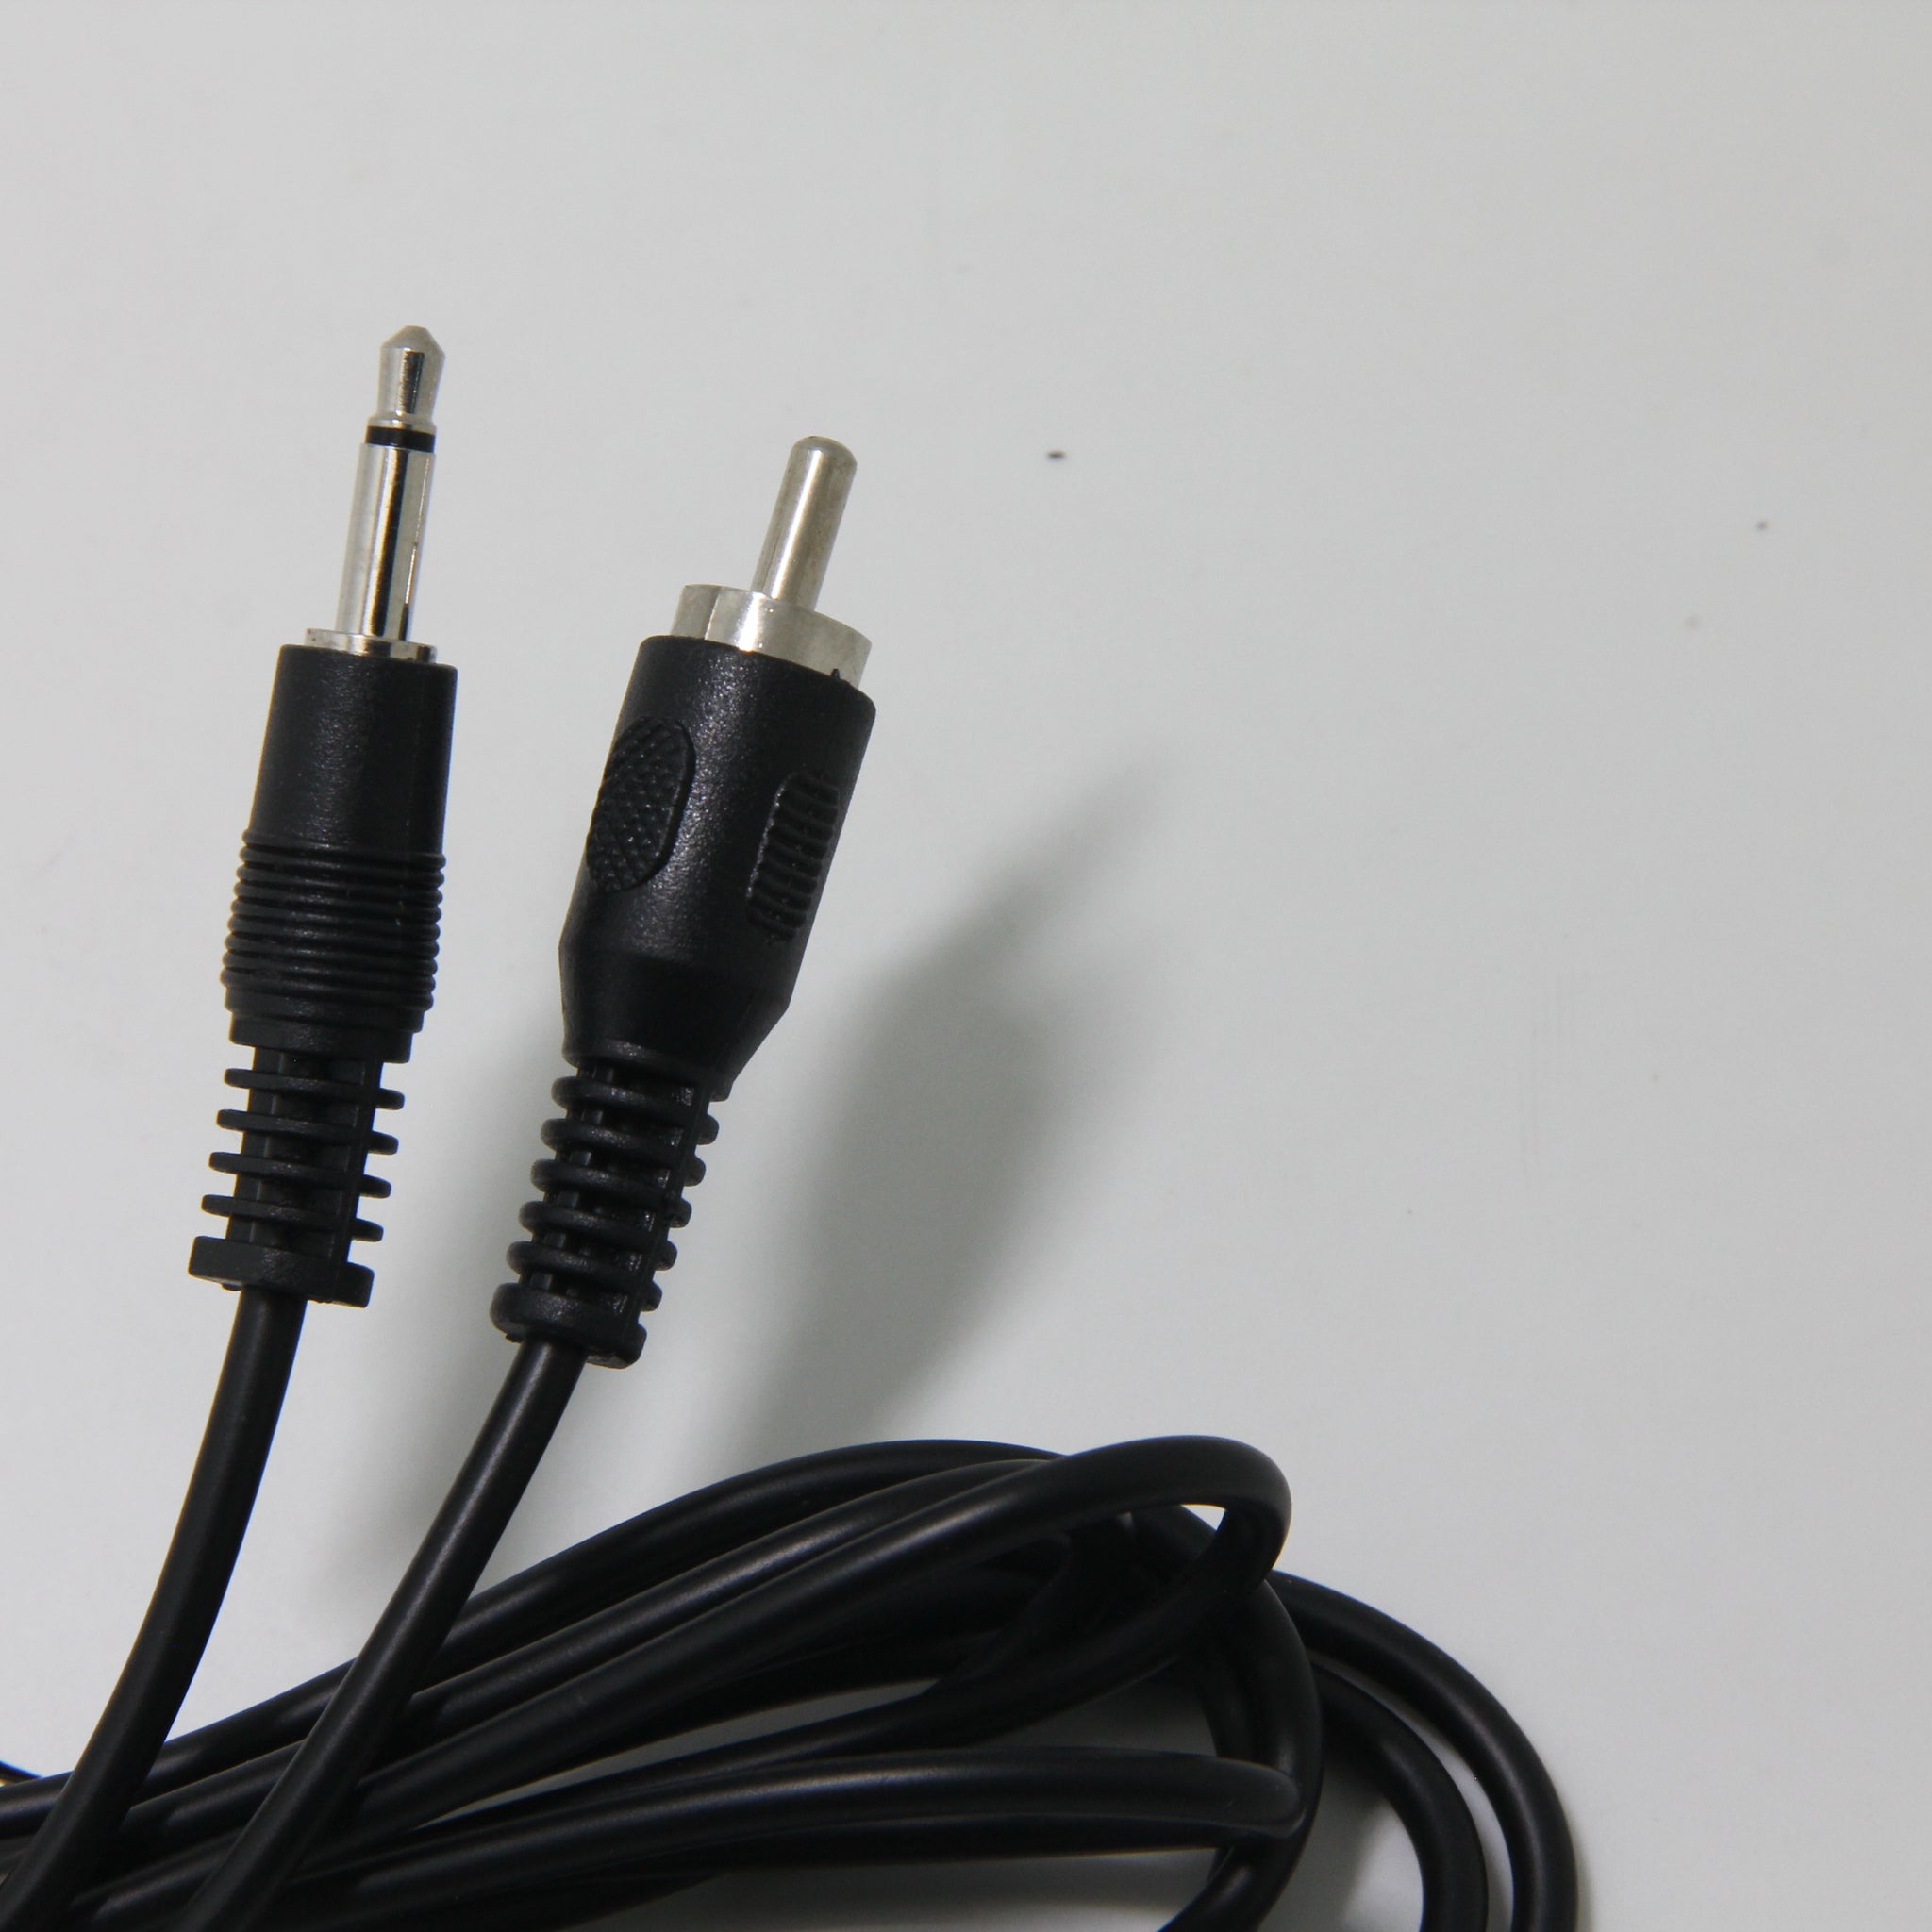 Mono Subwoofer Cable - Eagle Cable